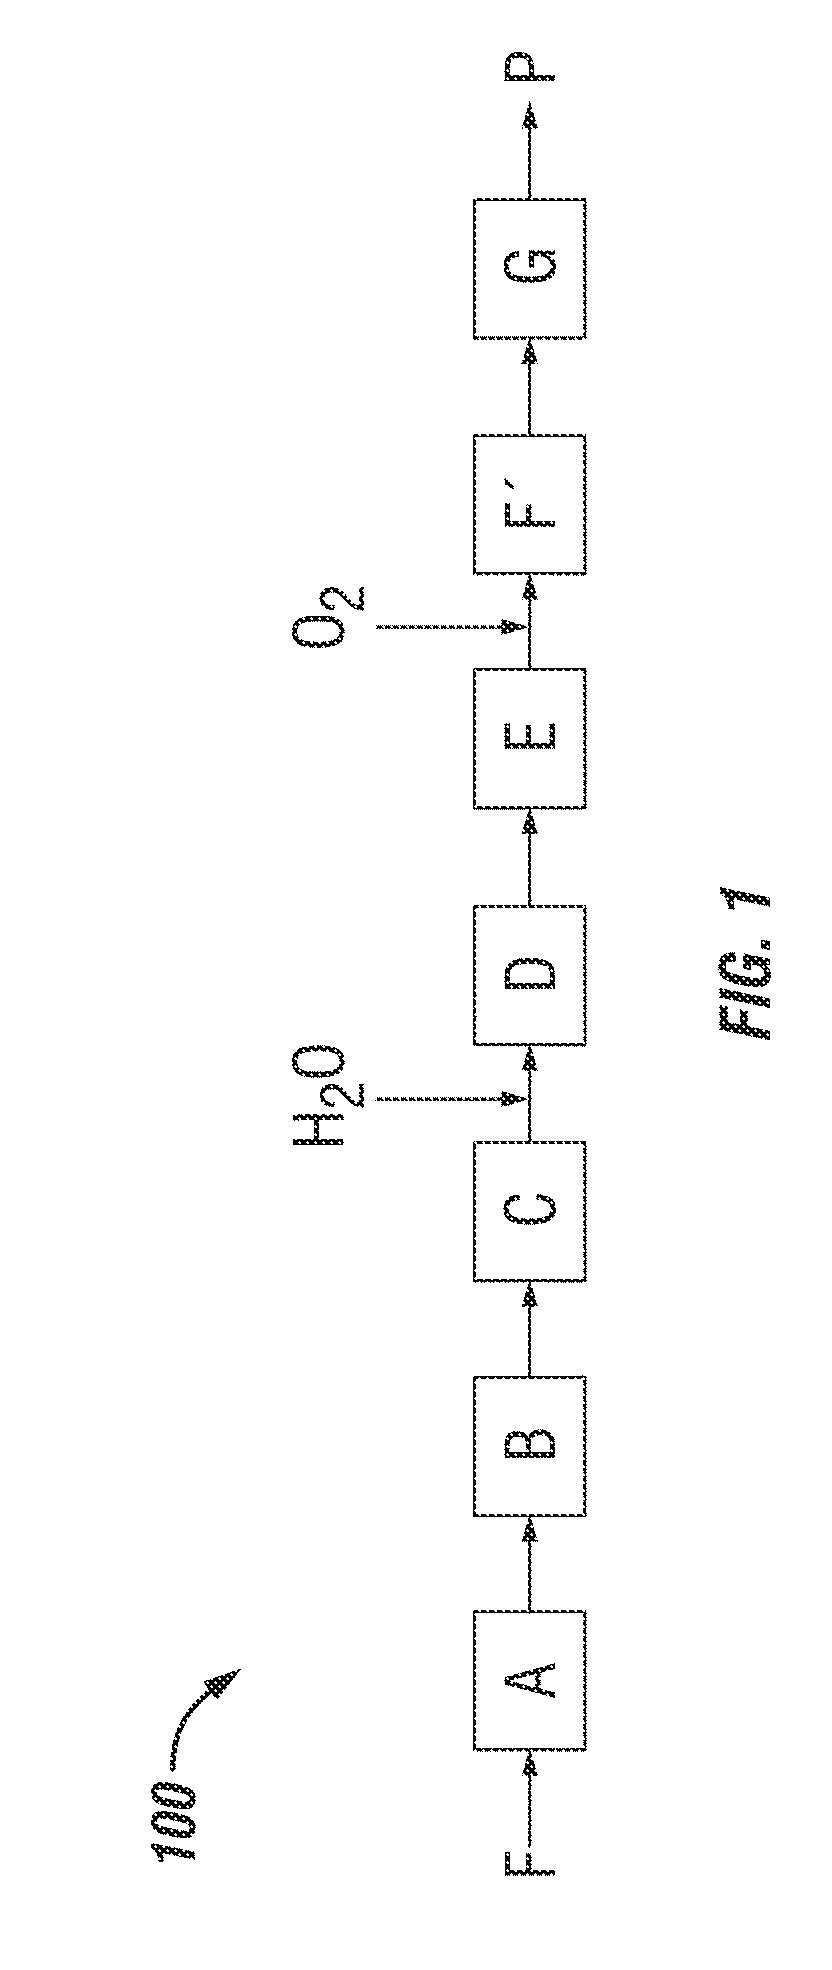 Hybrid Combustor for Fuel Processing Applications